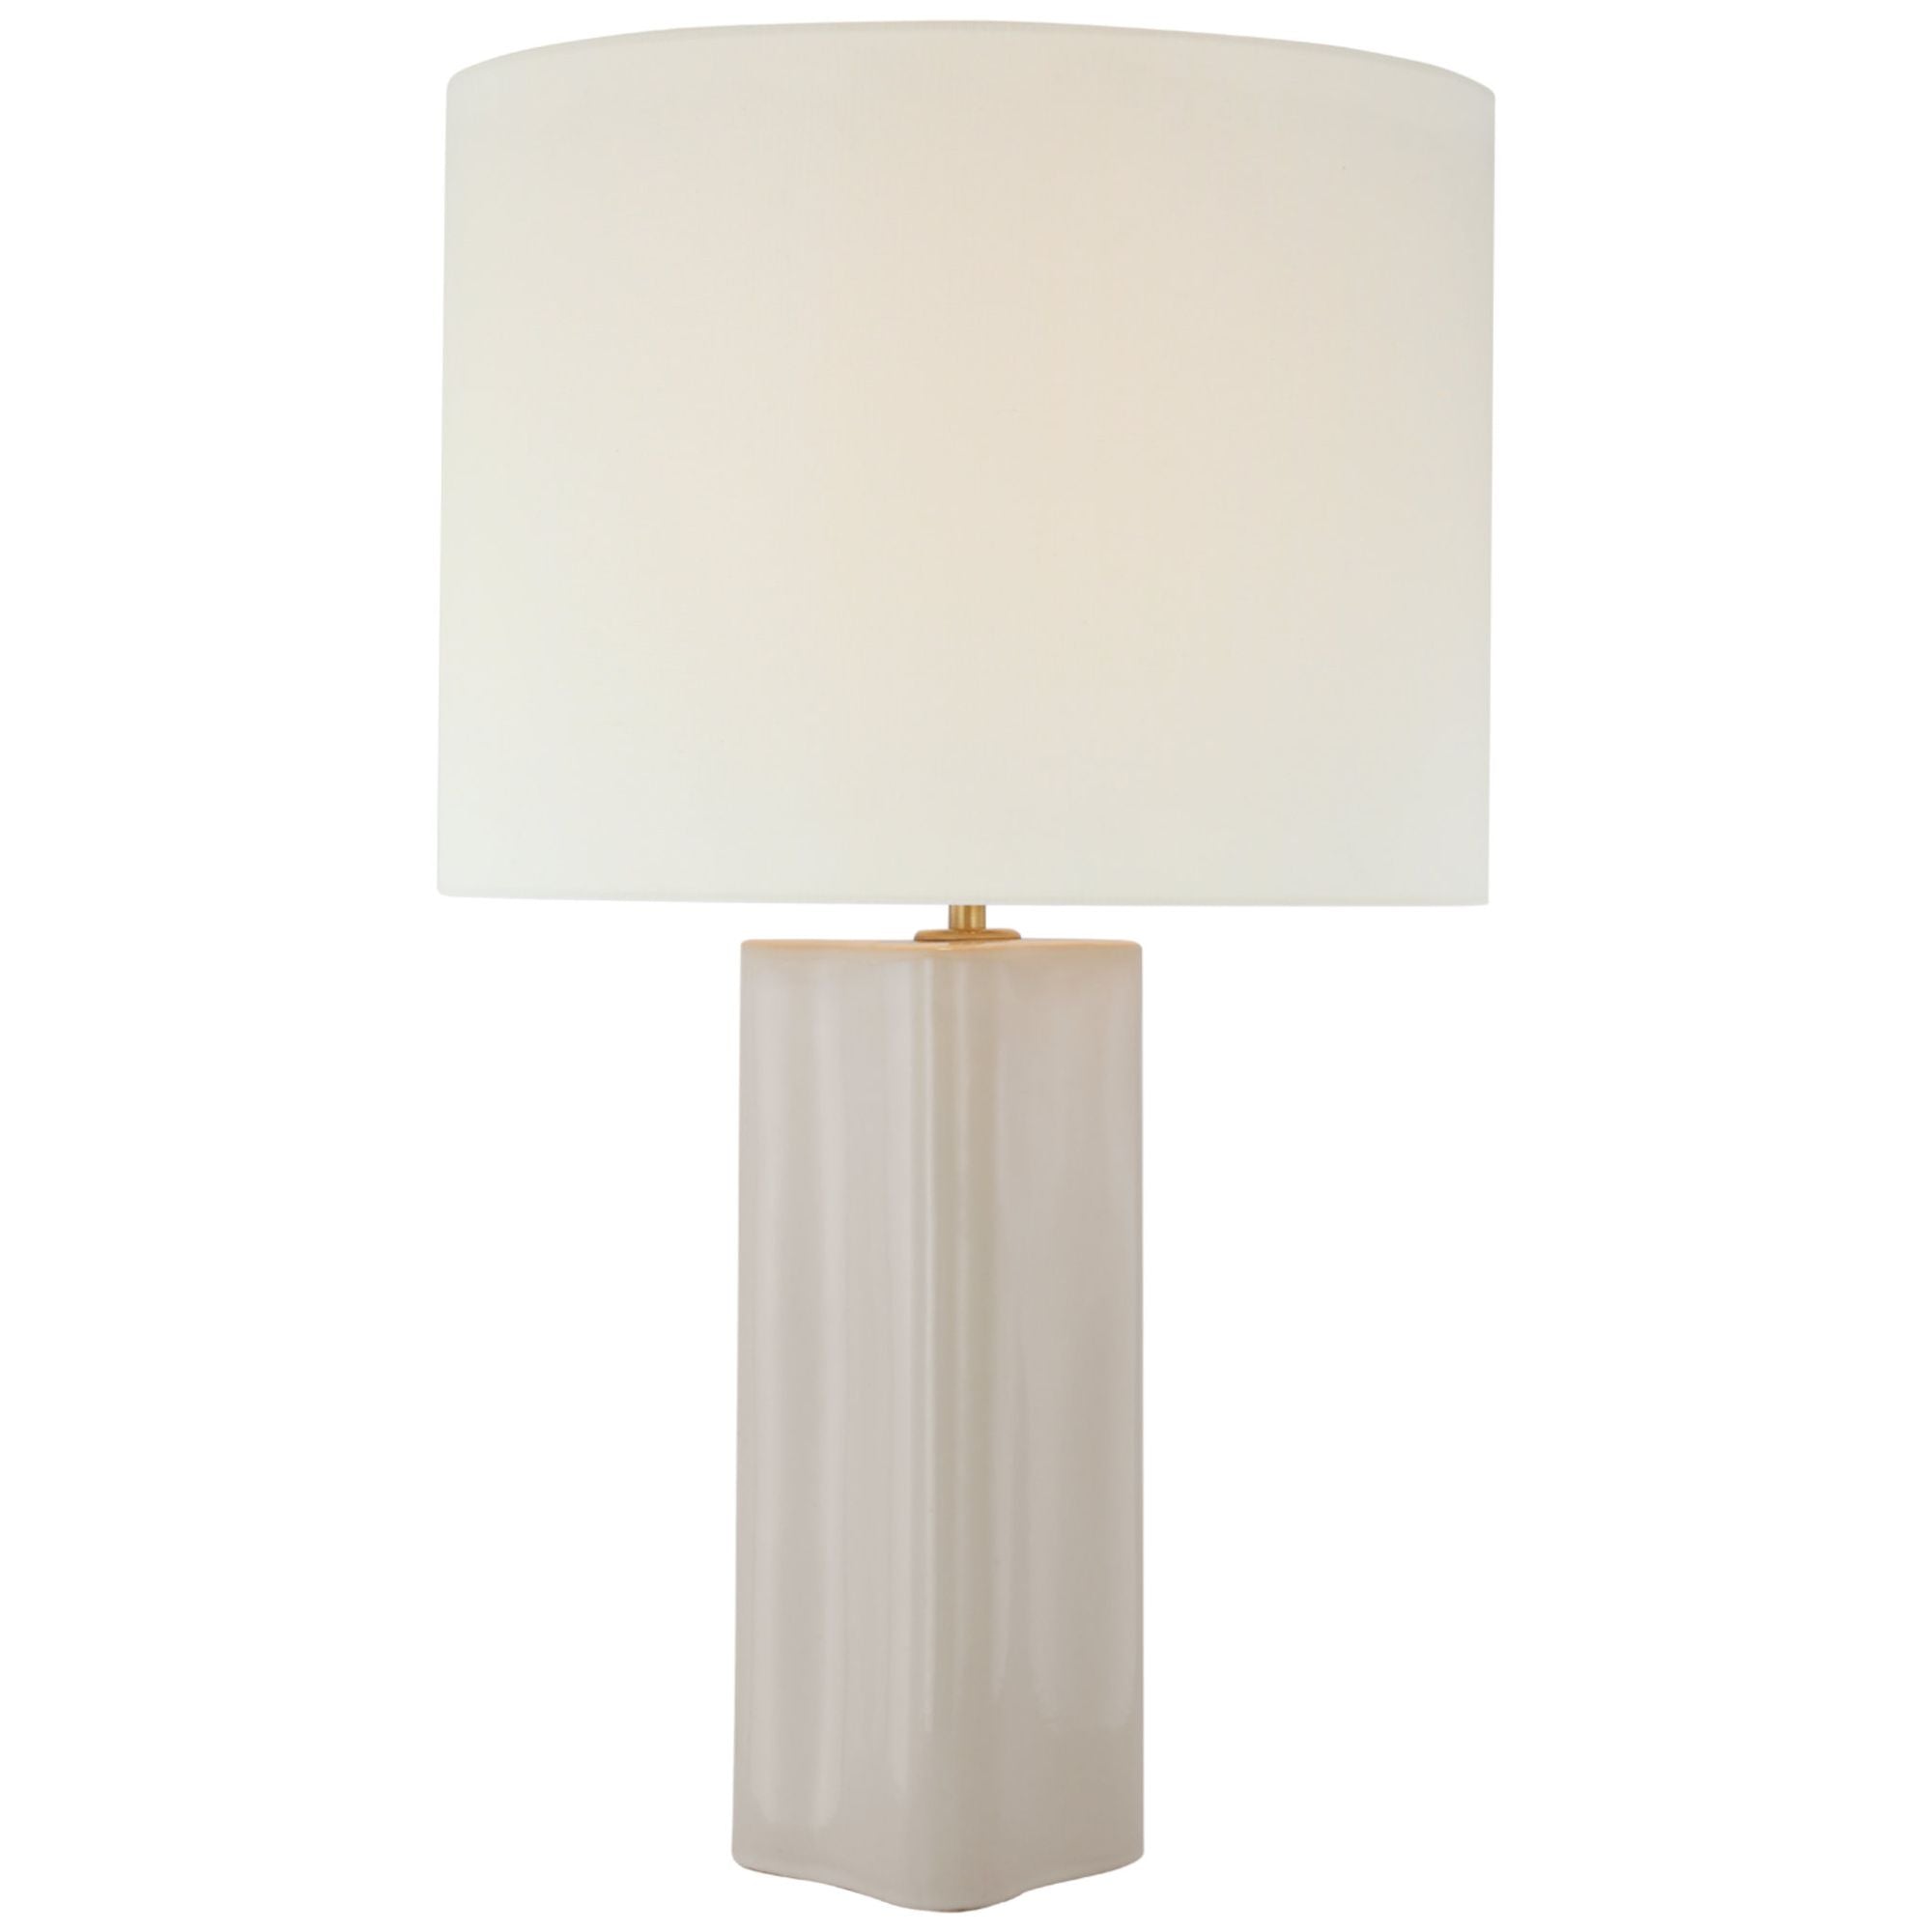 AERIN Mishca Large Table Lamp in Ivory with Linen Shade